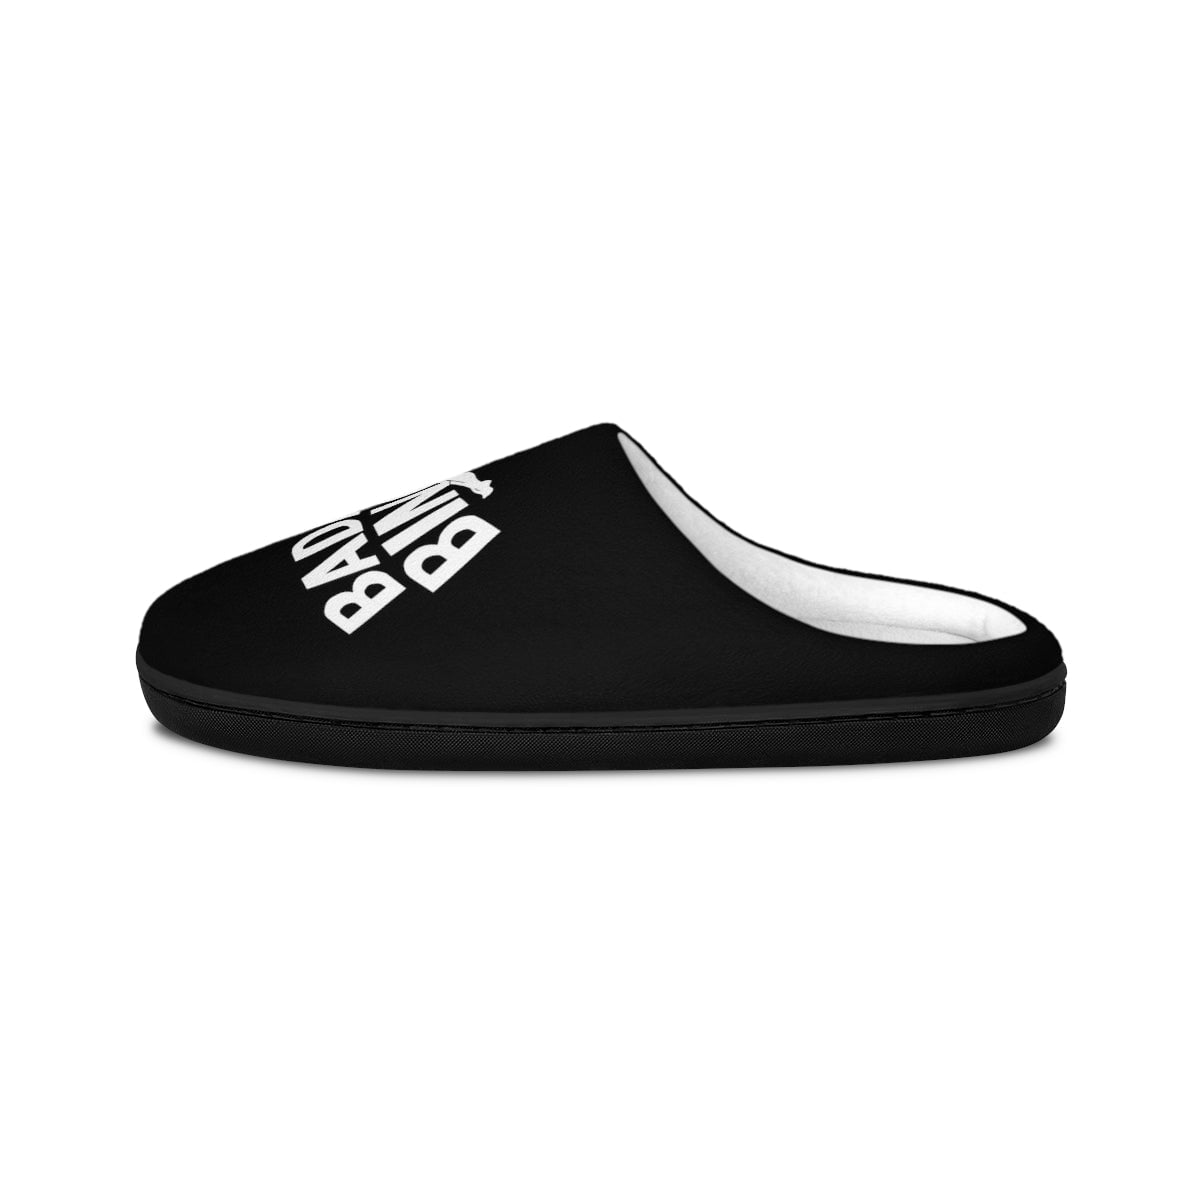 Bada Bing Mobsters club New Jersey Slippers